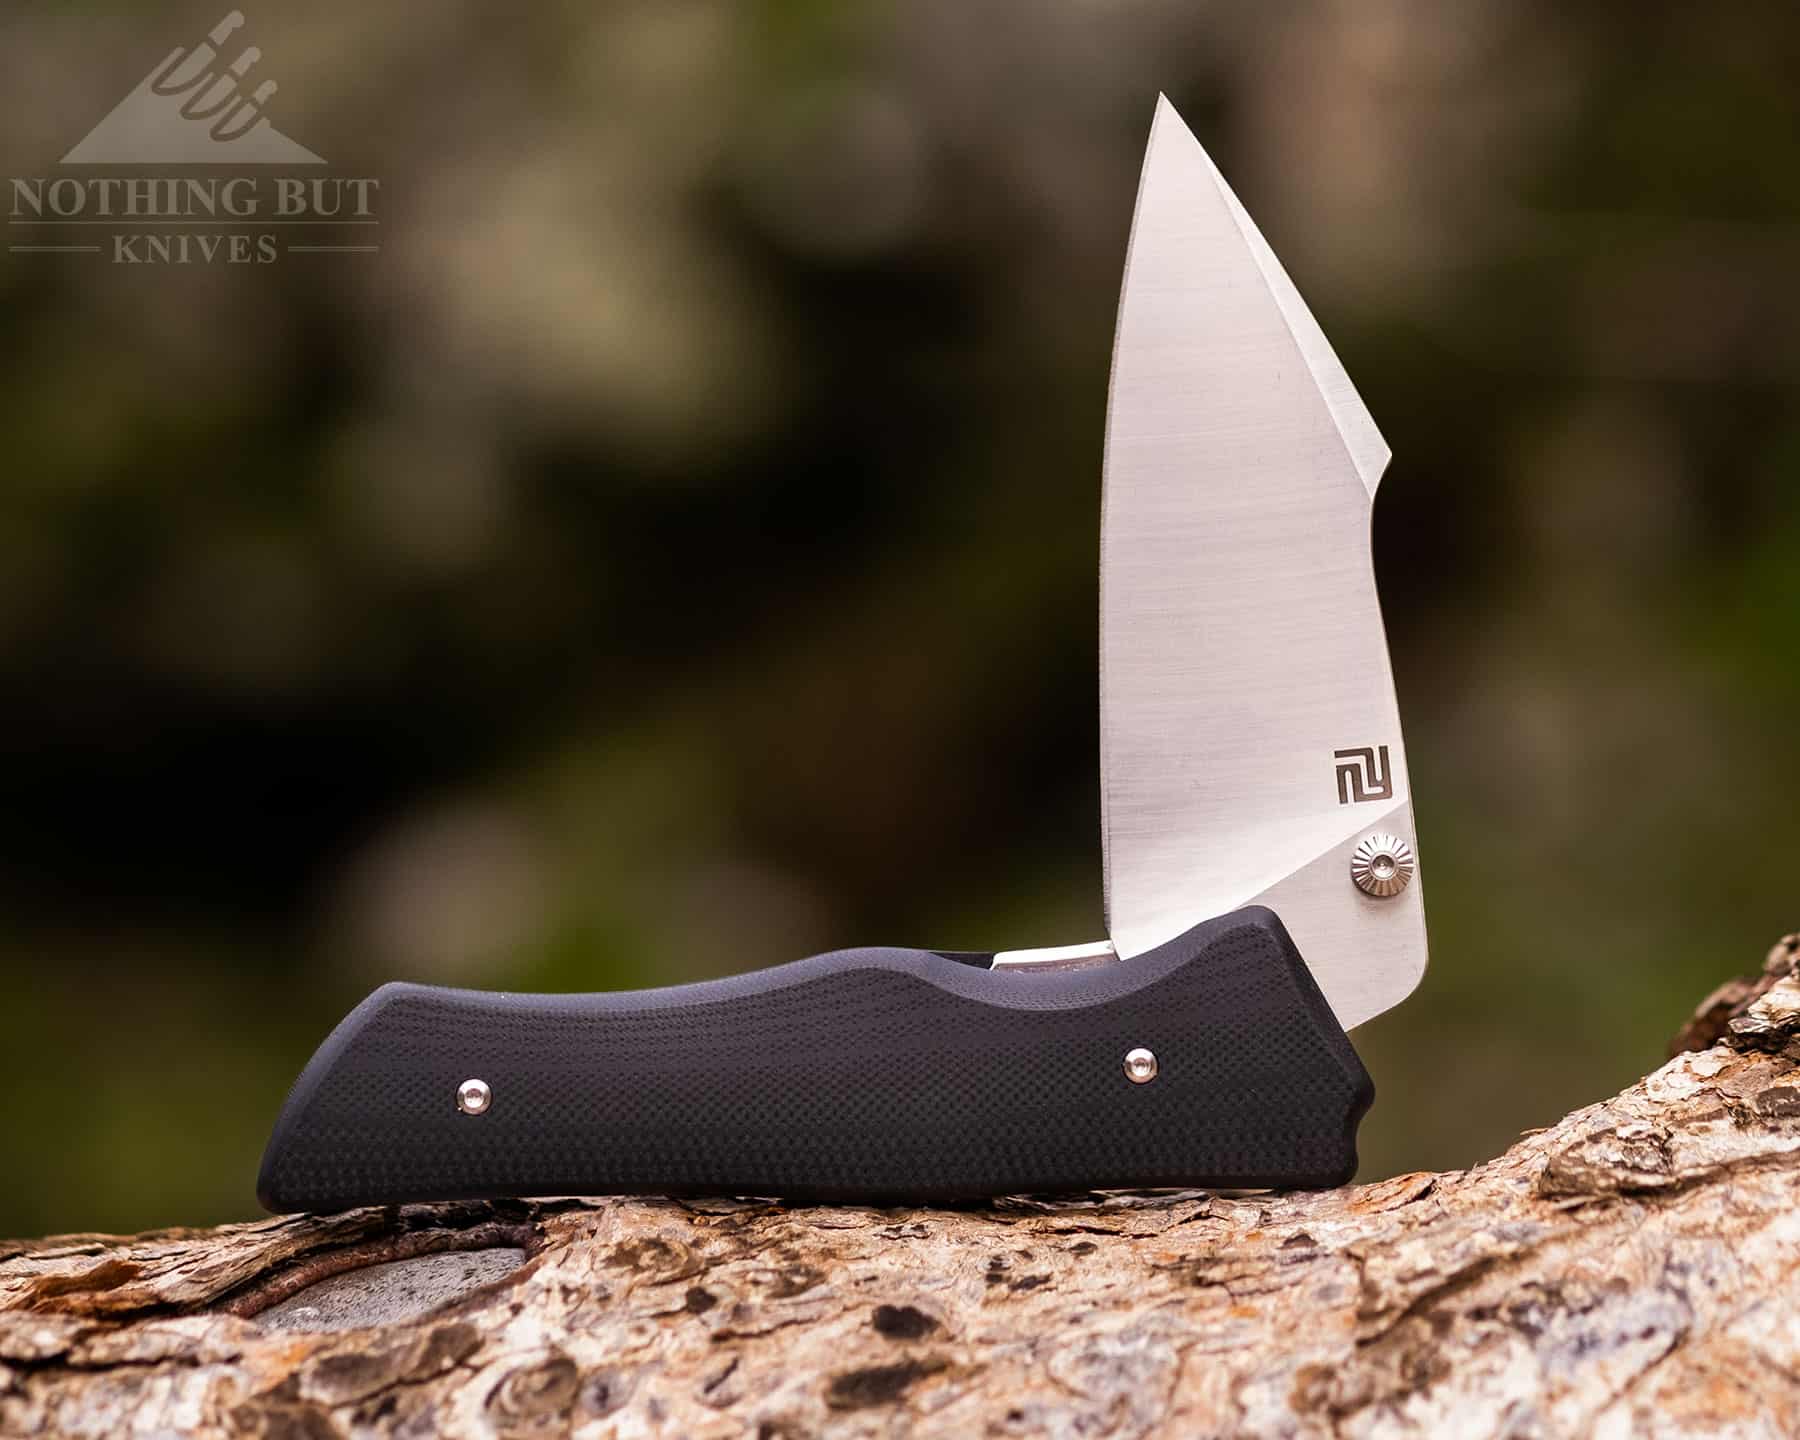 The new Ahab folder is a solid addition to Artisan Cutlery's catalog.